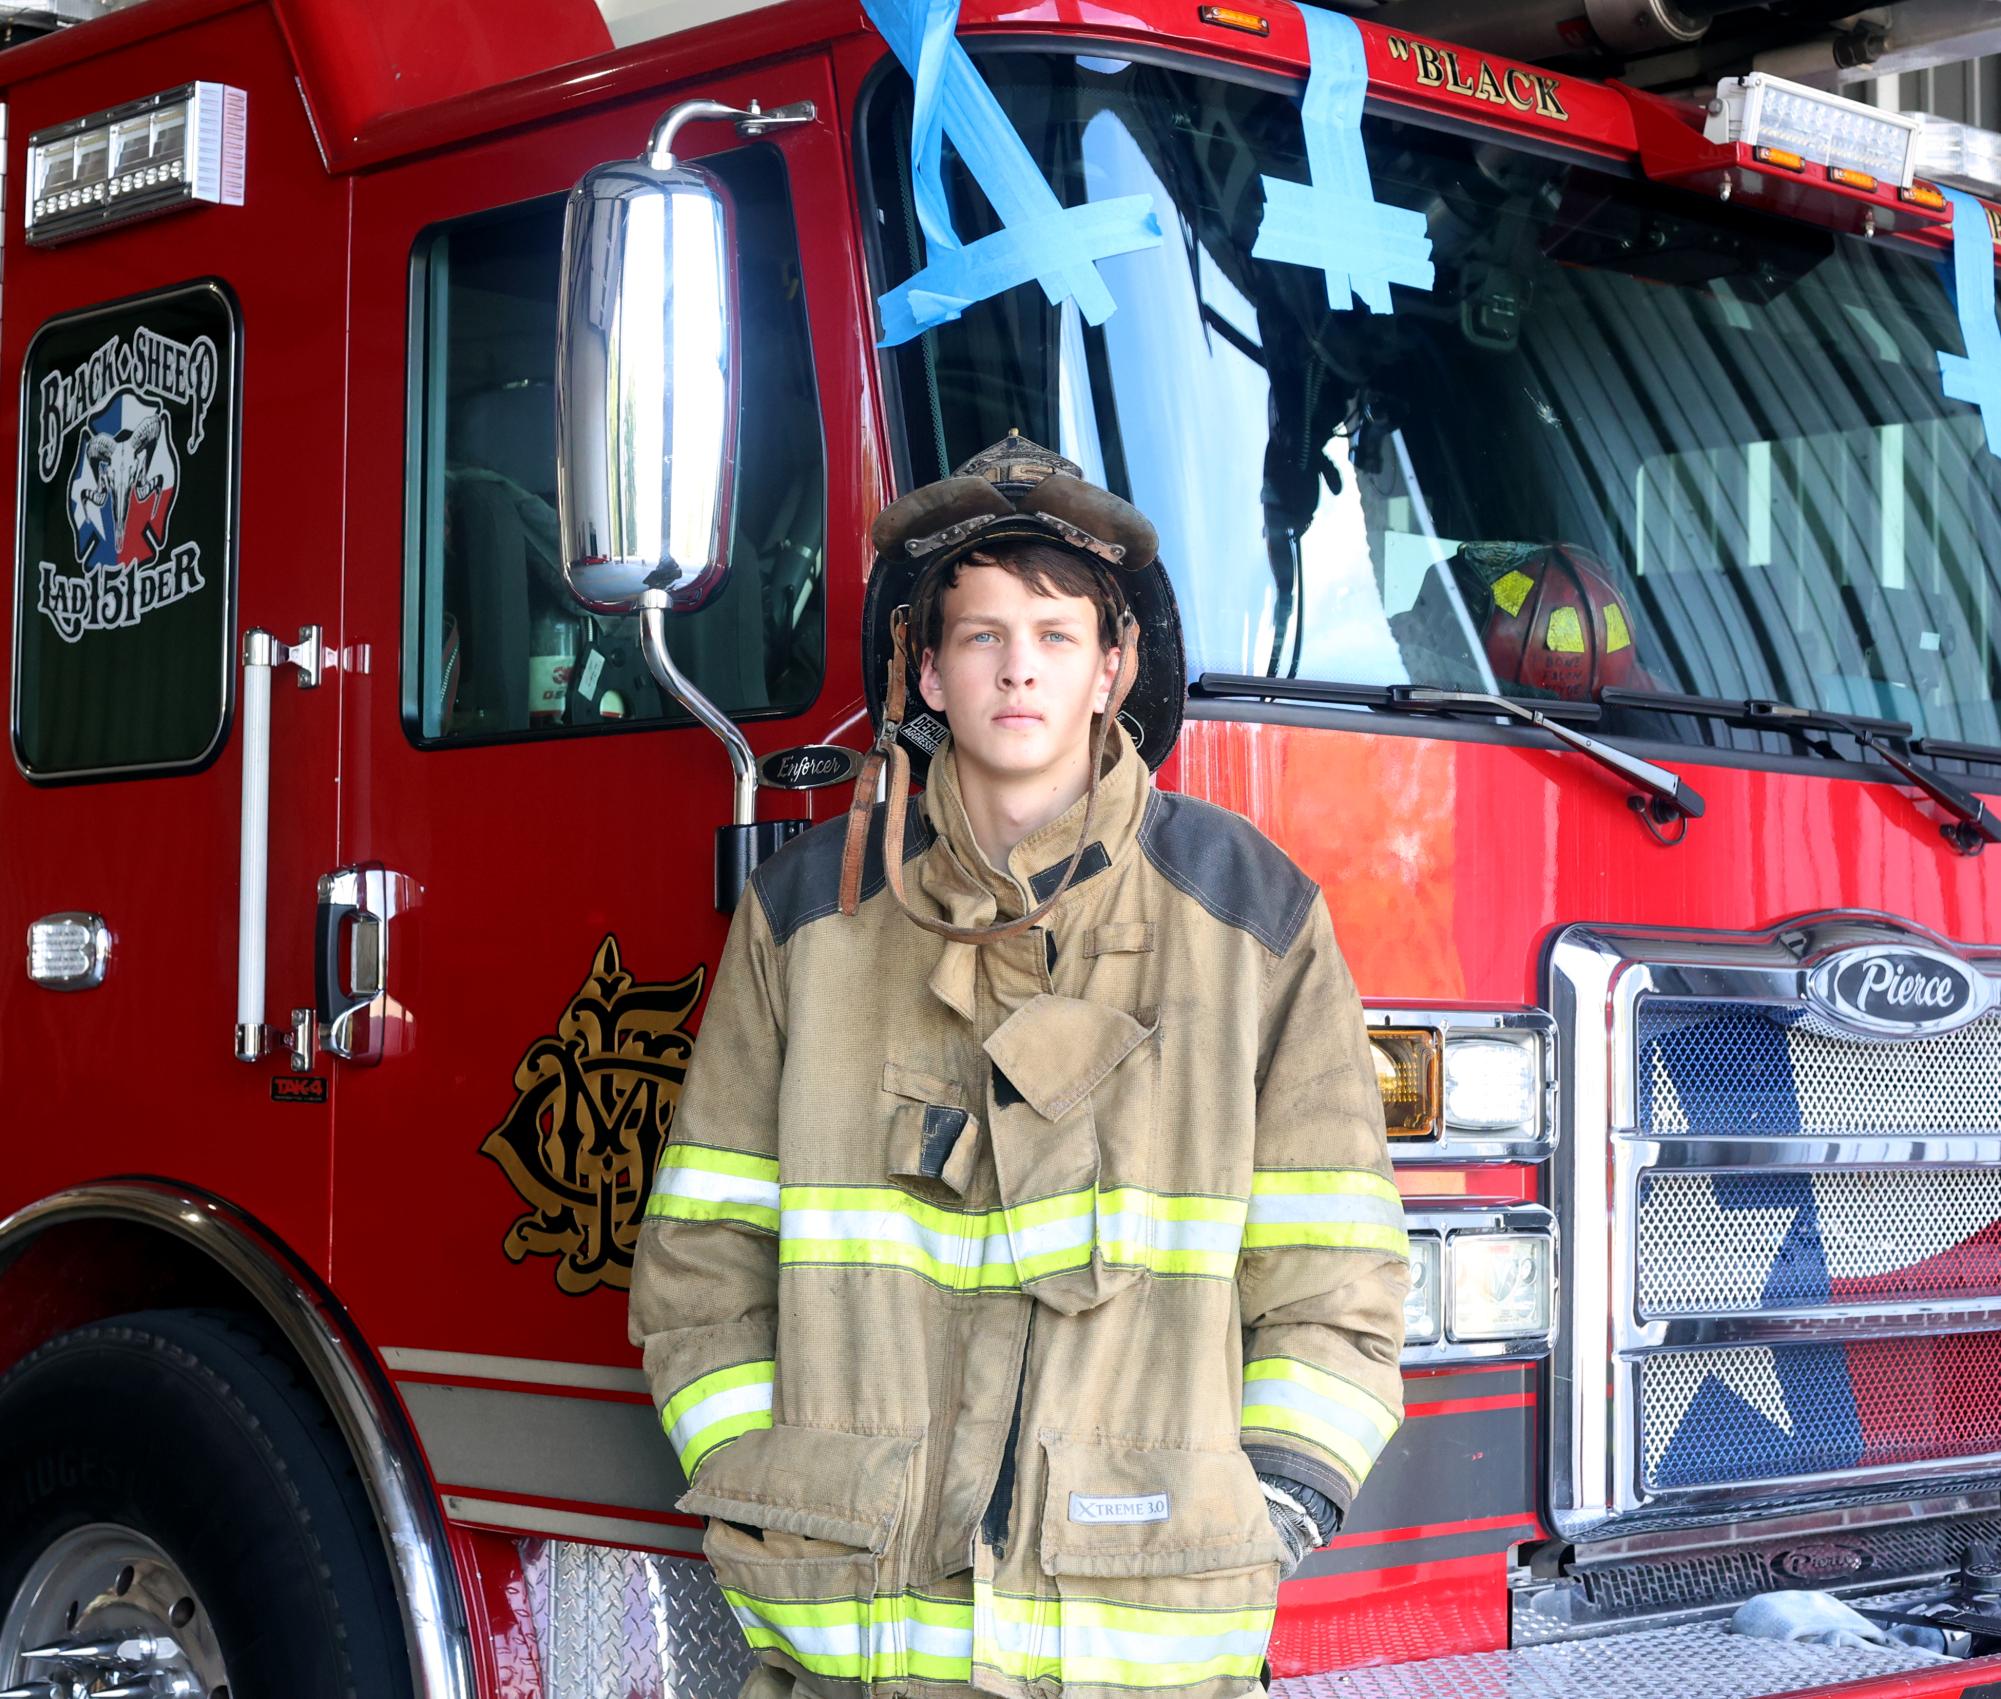 ROOKIE. Senior Bryan Pagett poses in front of New Caney Fire Station 151 with his uniform on Sunday, Oct. 22. Padgett is a volunteer firefighter two days a week, either after school or on weekends. “It’s been a fun experience so far,” Padgett said. “I can’t wait to graduate so I can go to the fire academy.”
